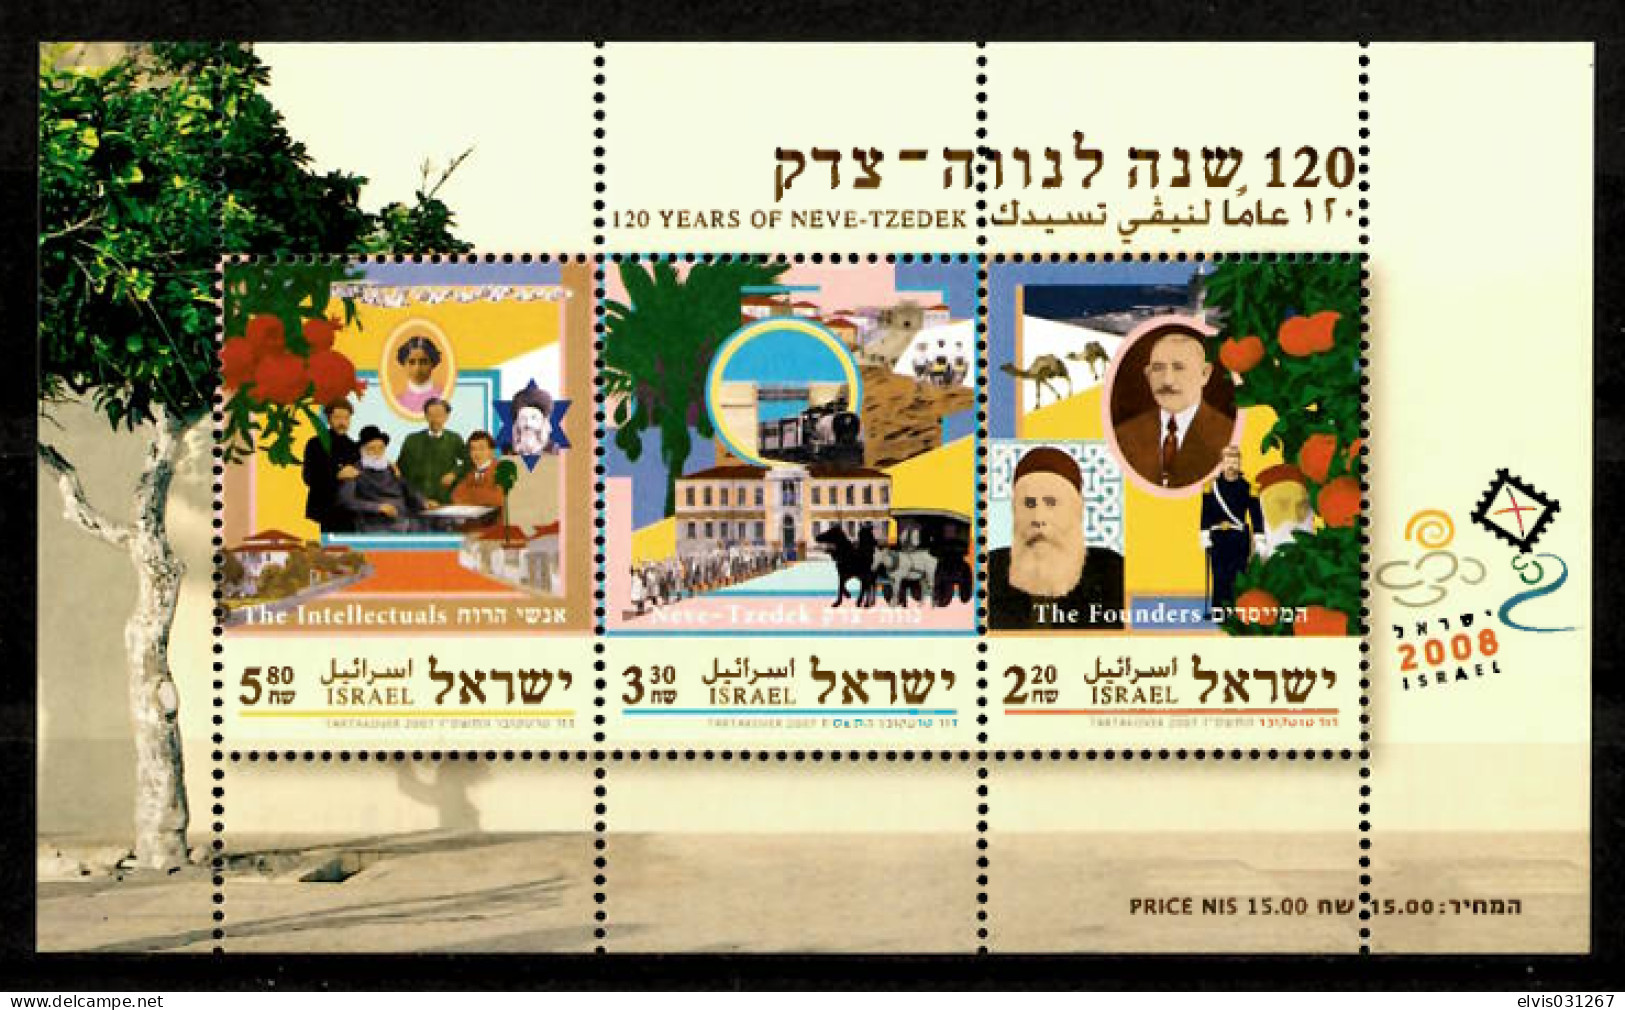 Israel - 2007, Michel/Philex No. : 1924-1926 - MNH - BLOCK 75 - Unused Stamps (with Tabs)